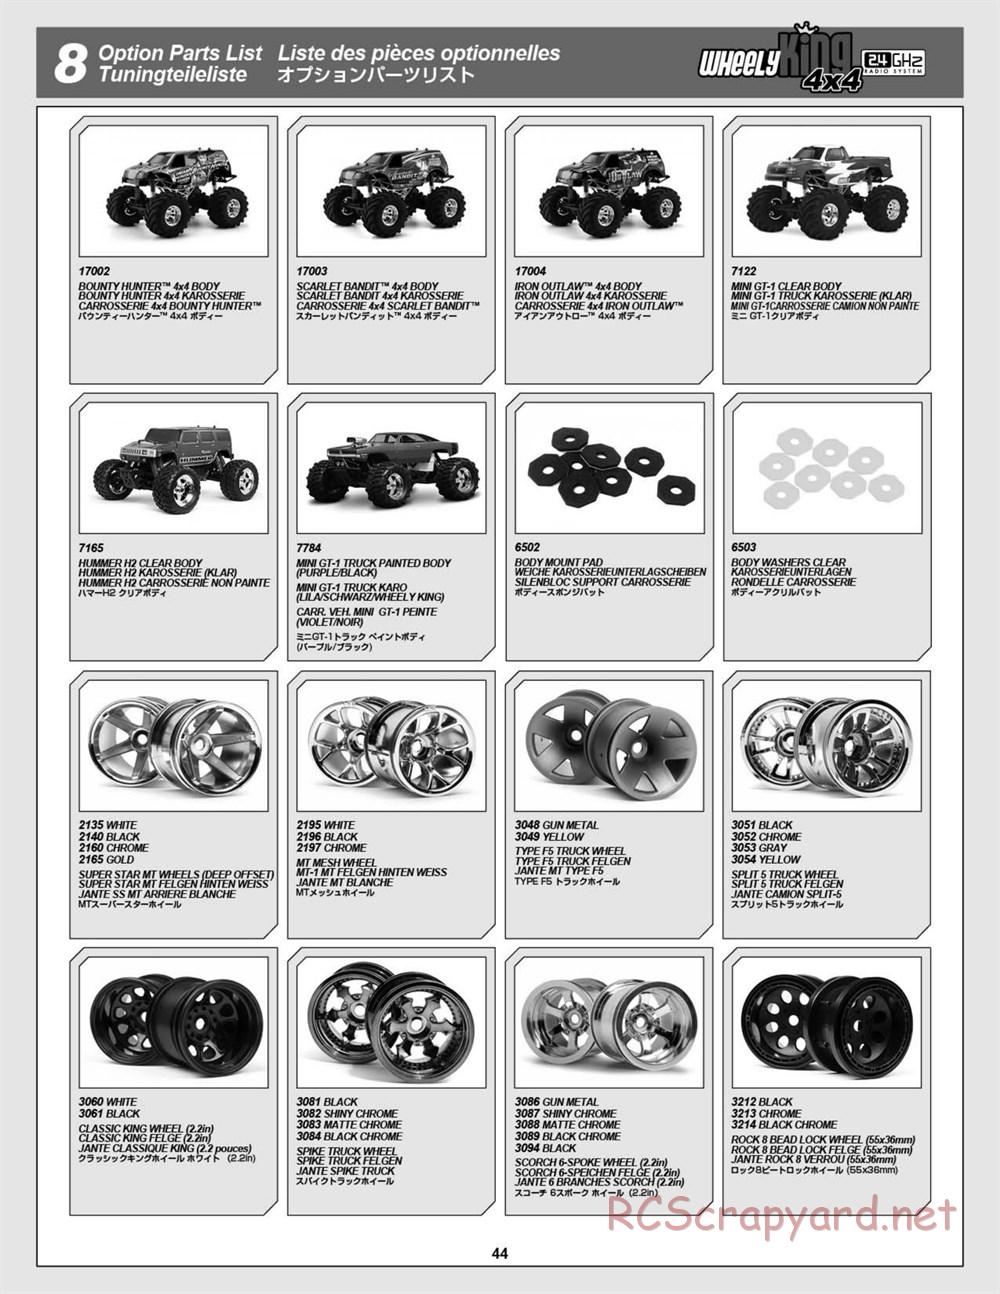 HPI - Wheely King 4x4 - Manual - Page 44